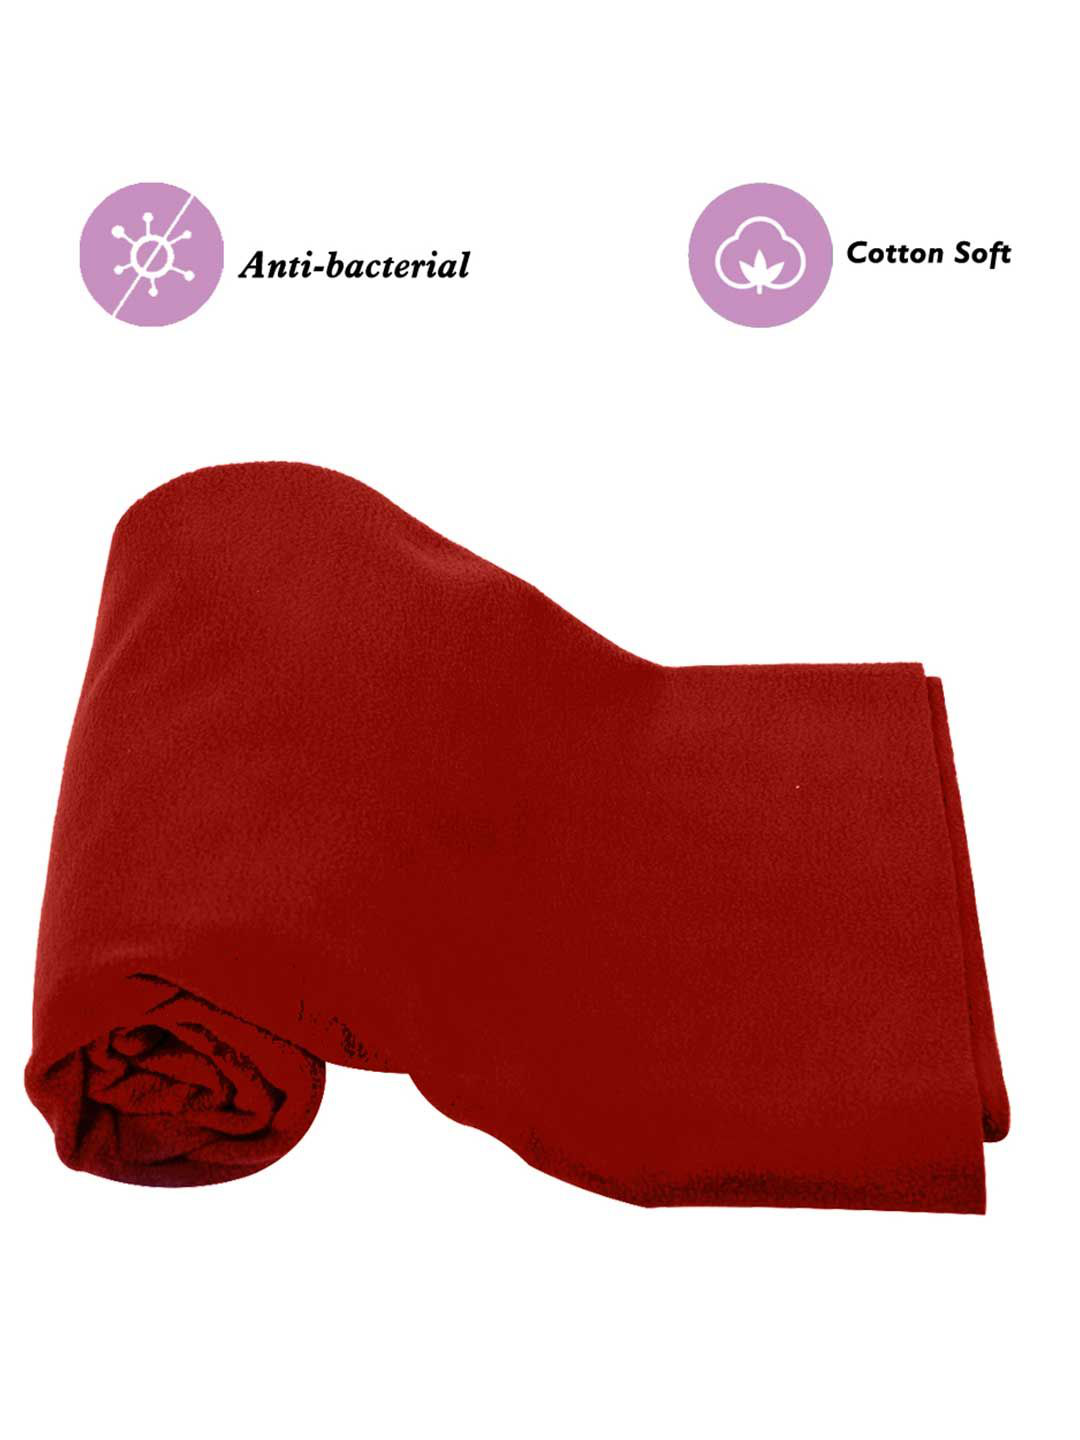 Mee Mee Breathable & Total Dry Sheet Protector Mat (XL, Maroon)